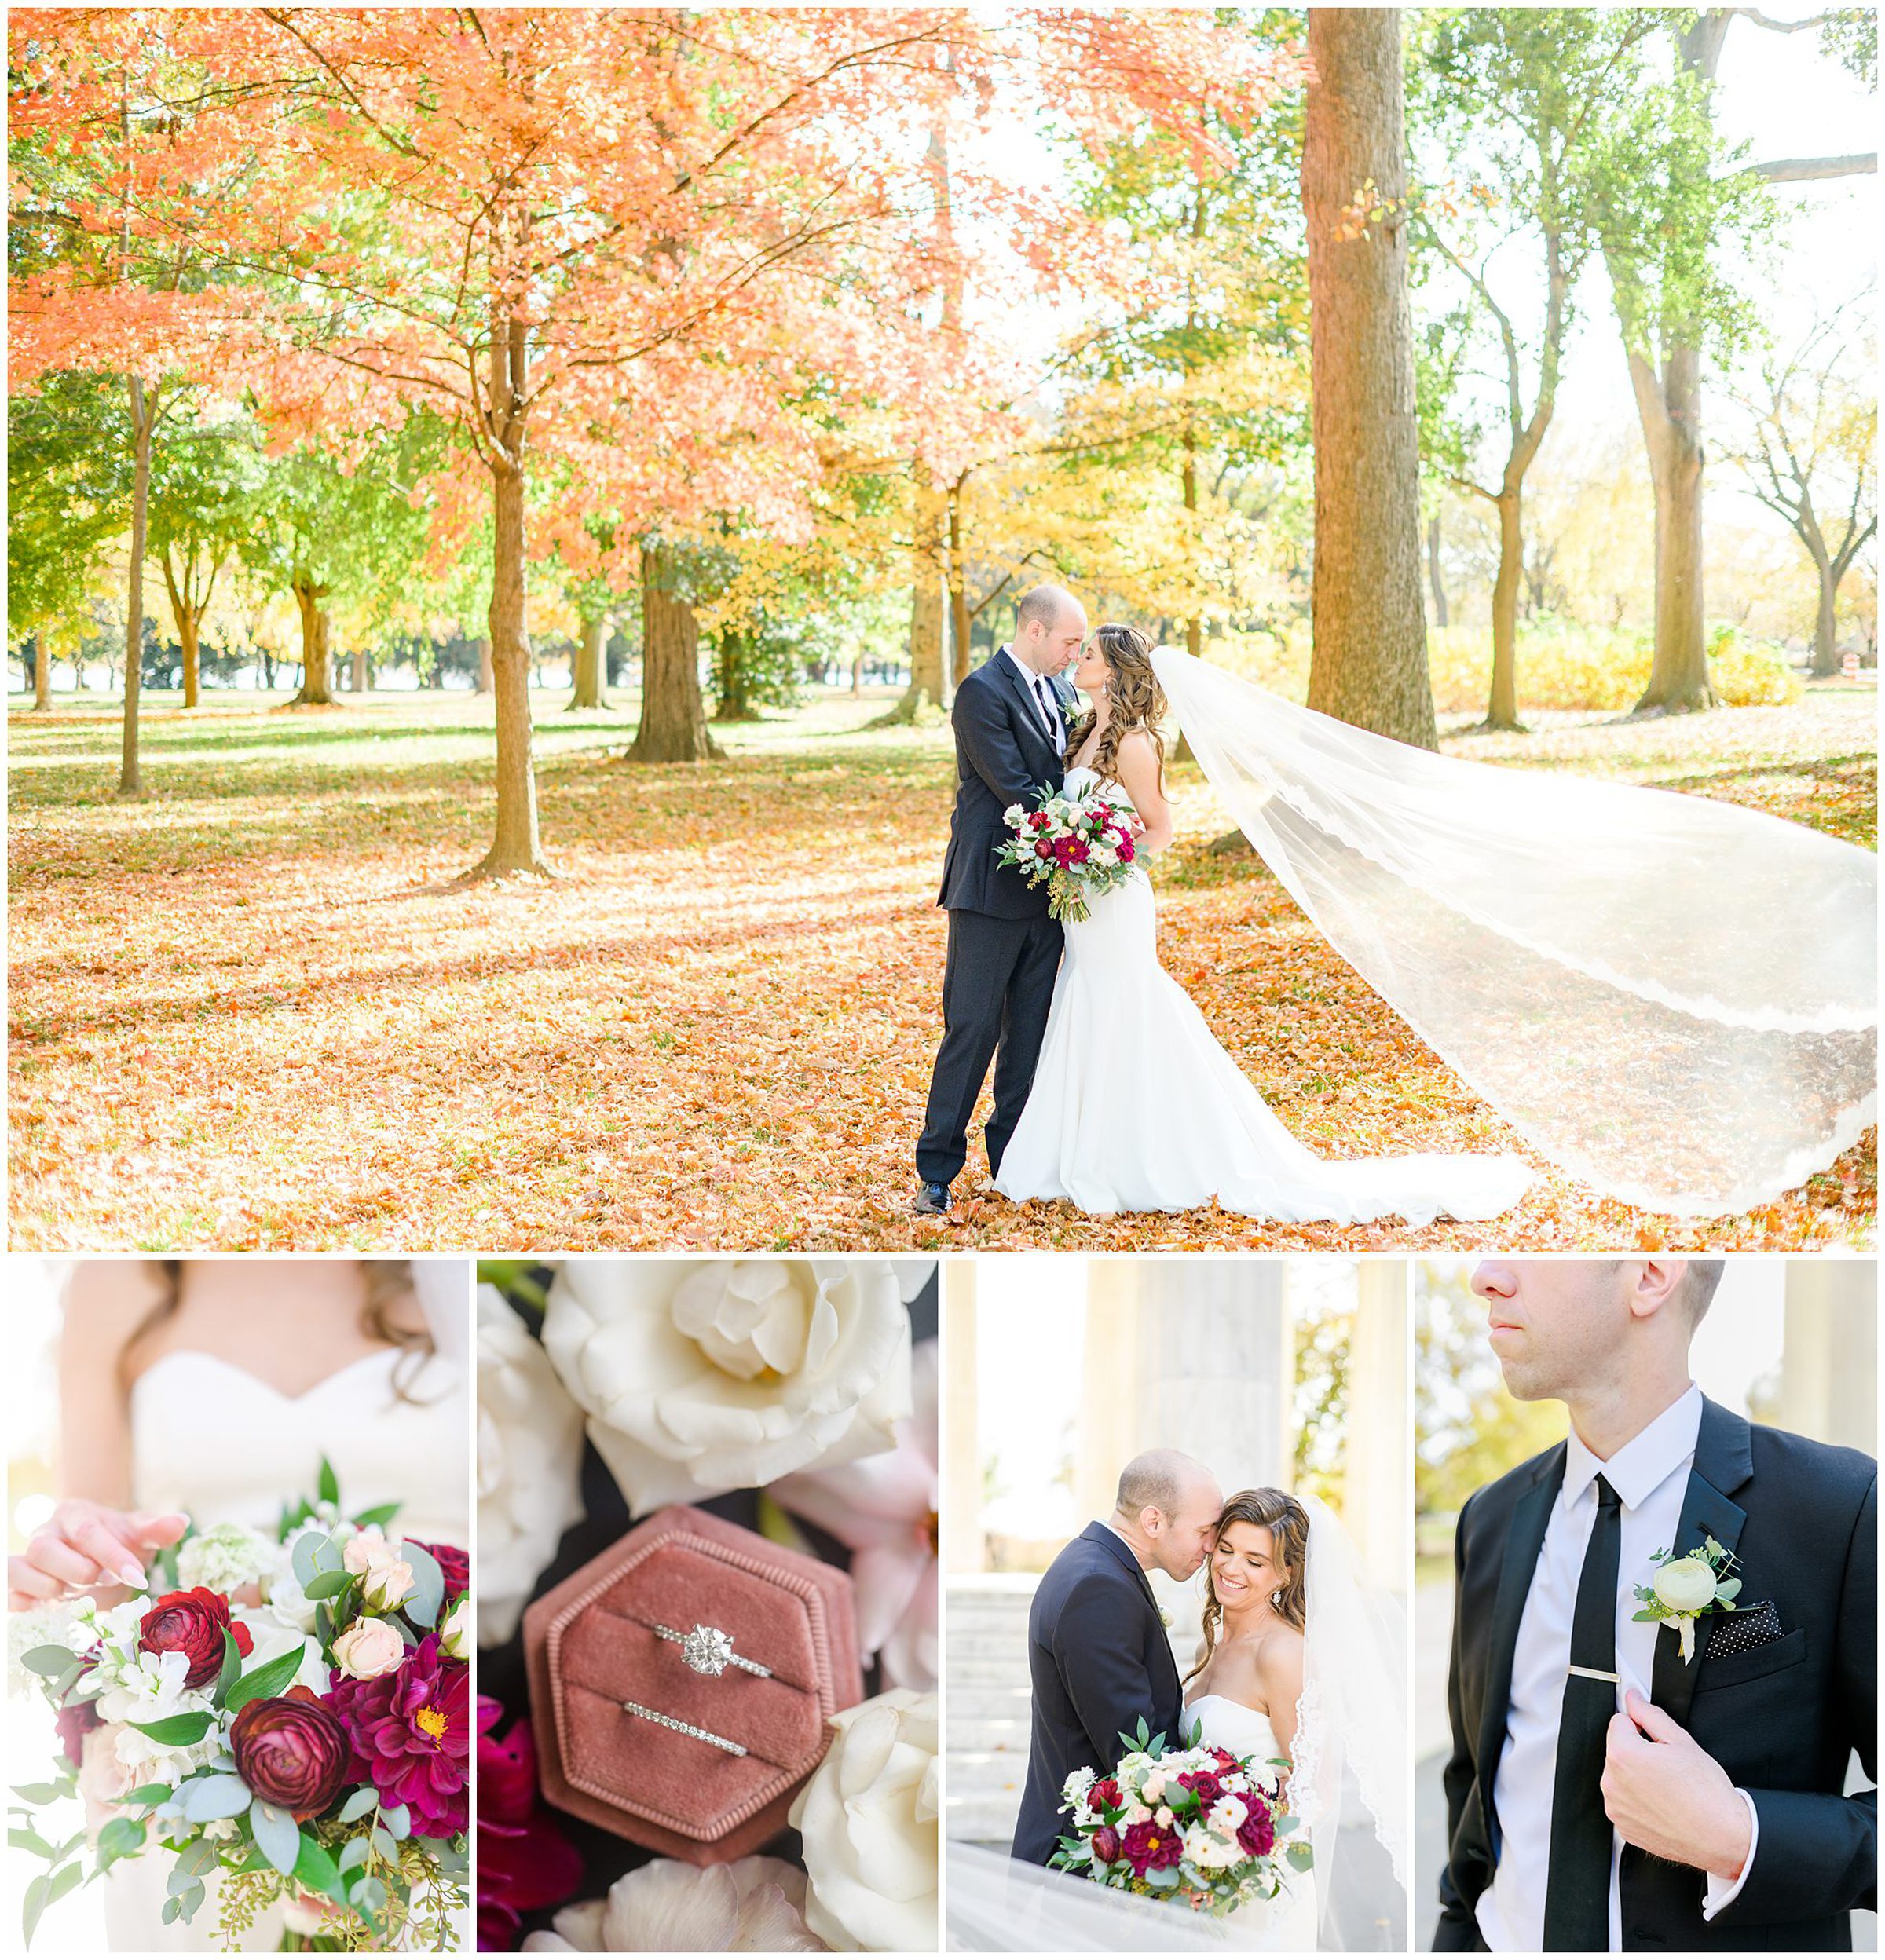 Fall wedding day portraits and details featuring Mayflower Hotel DC wedding photos photographed by Baltimore wedding photographer Cait Kramer Photography